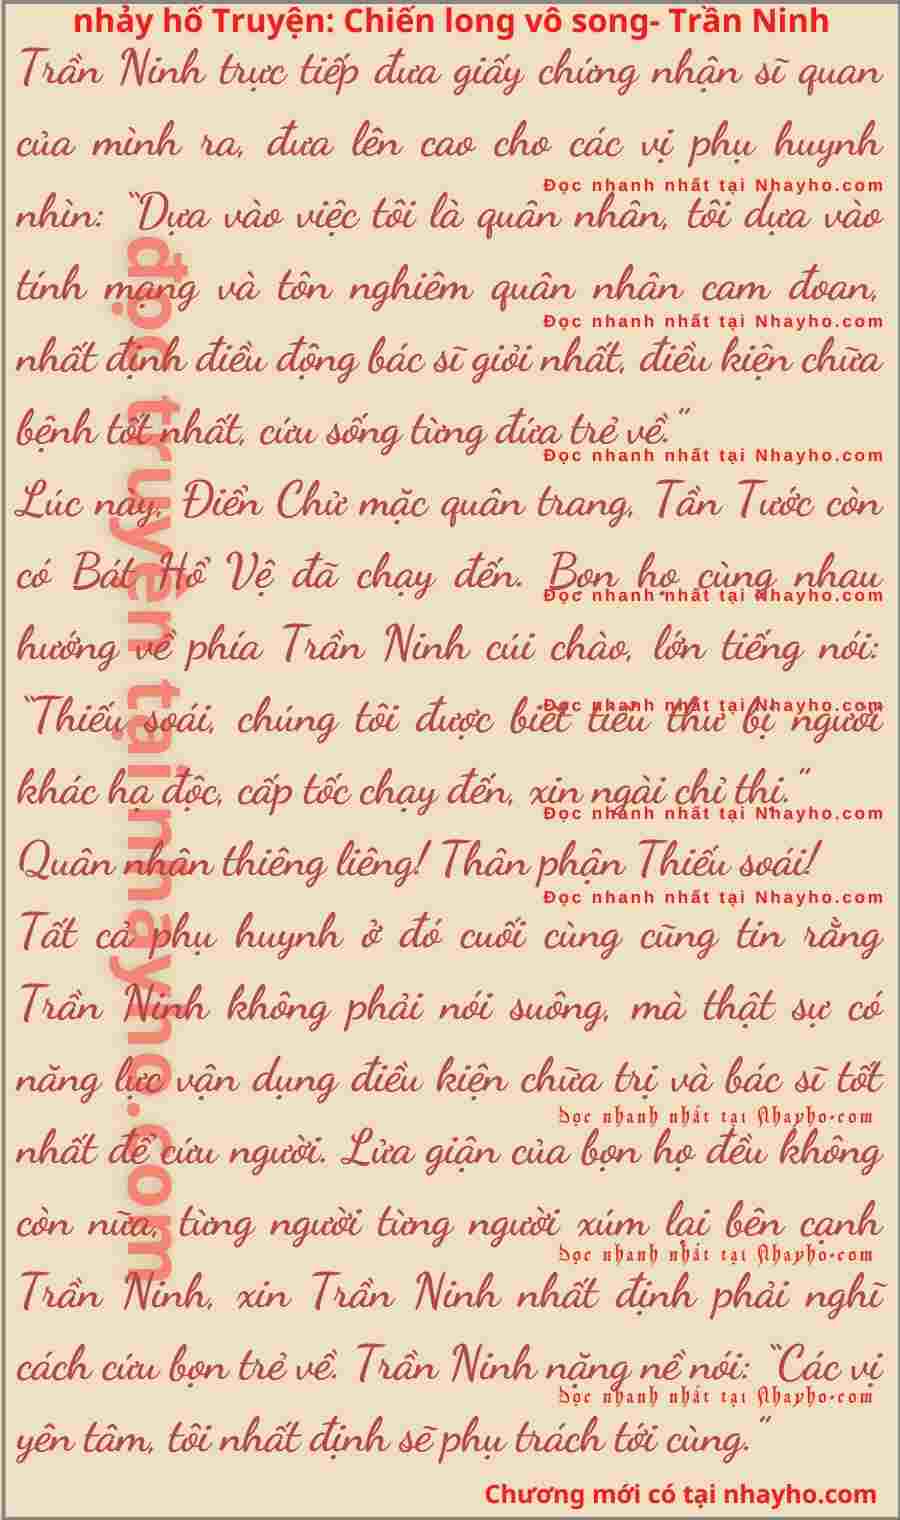 chien-long-vo-song-806-0